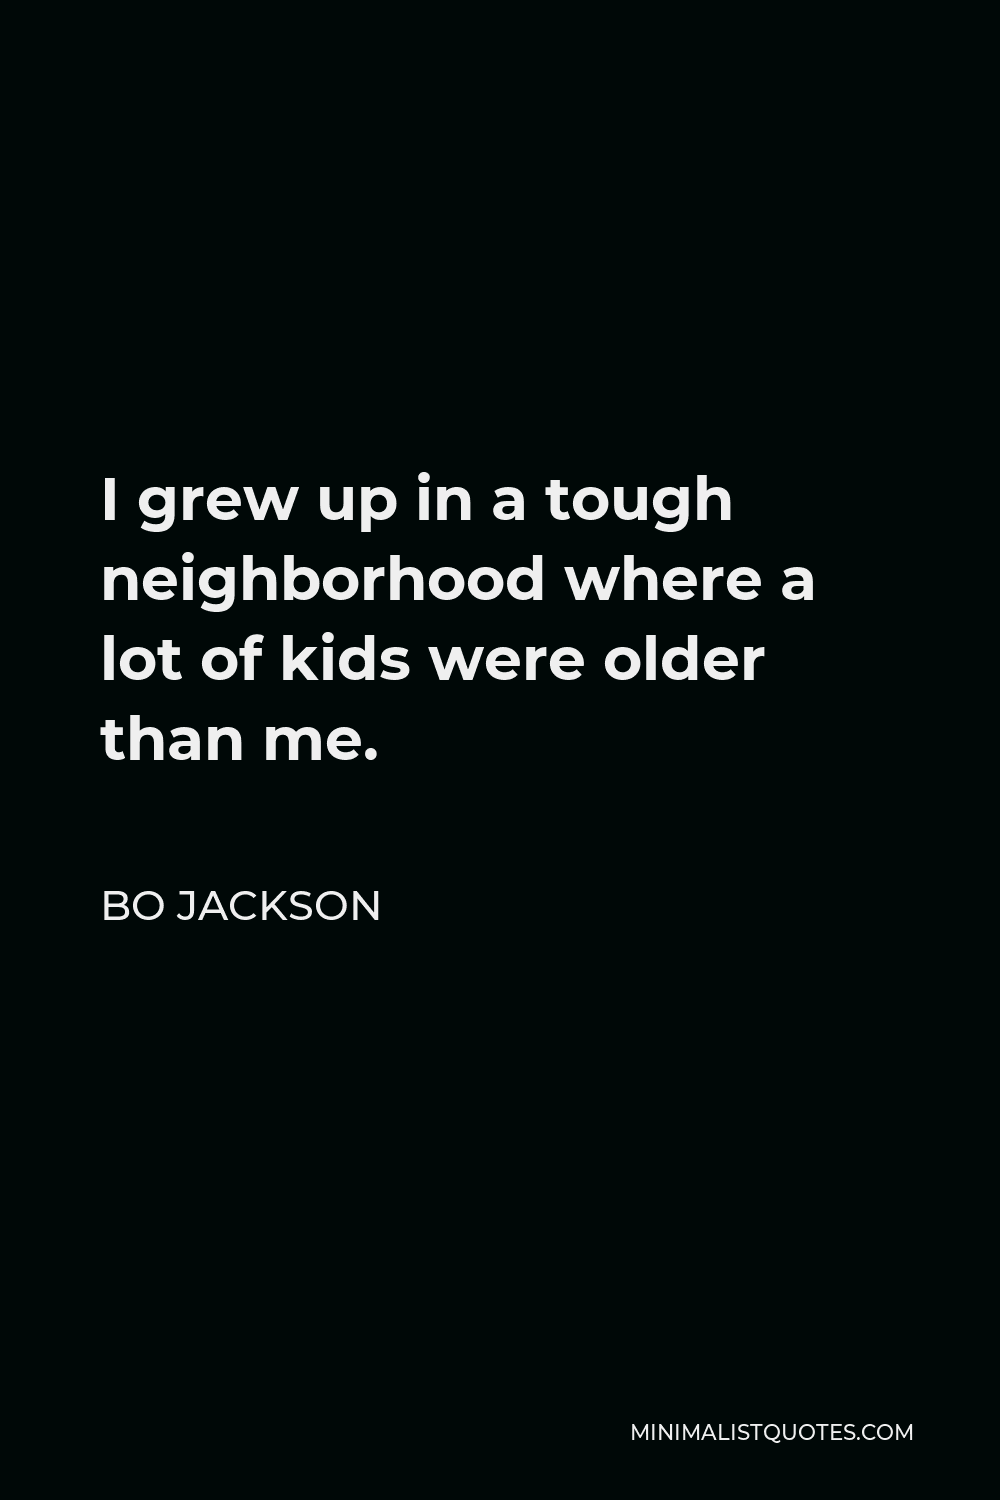 Bo Jackson Quote - I grew up in a tough neighborhood where a lot of kids were older than me.